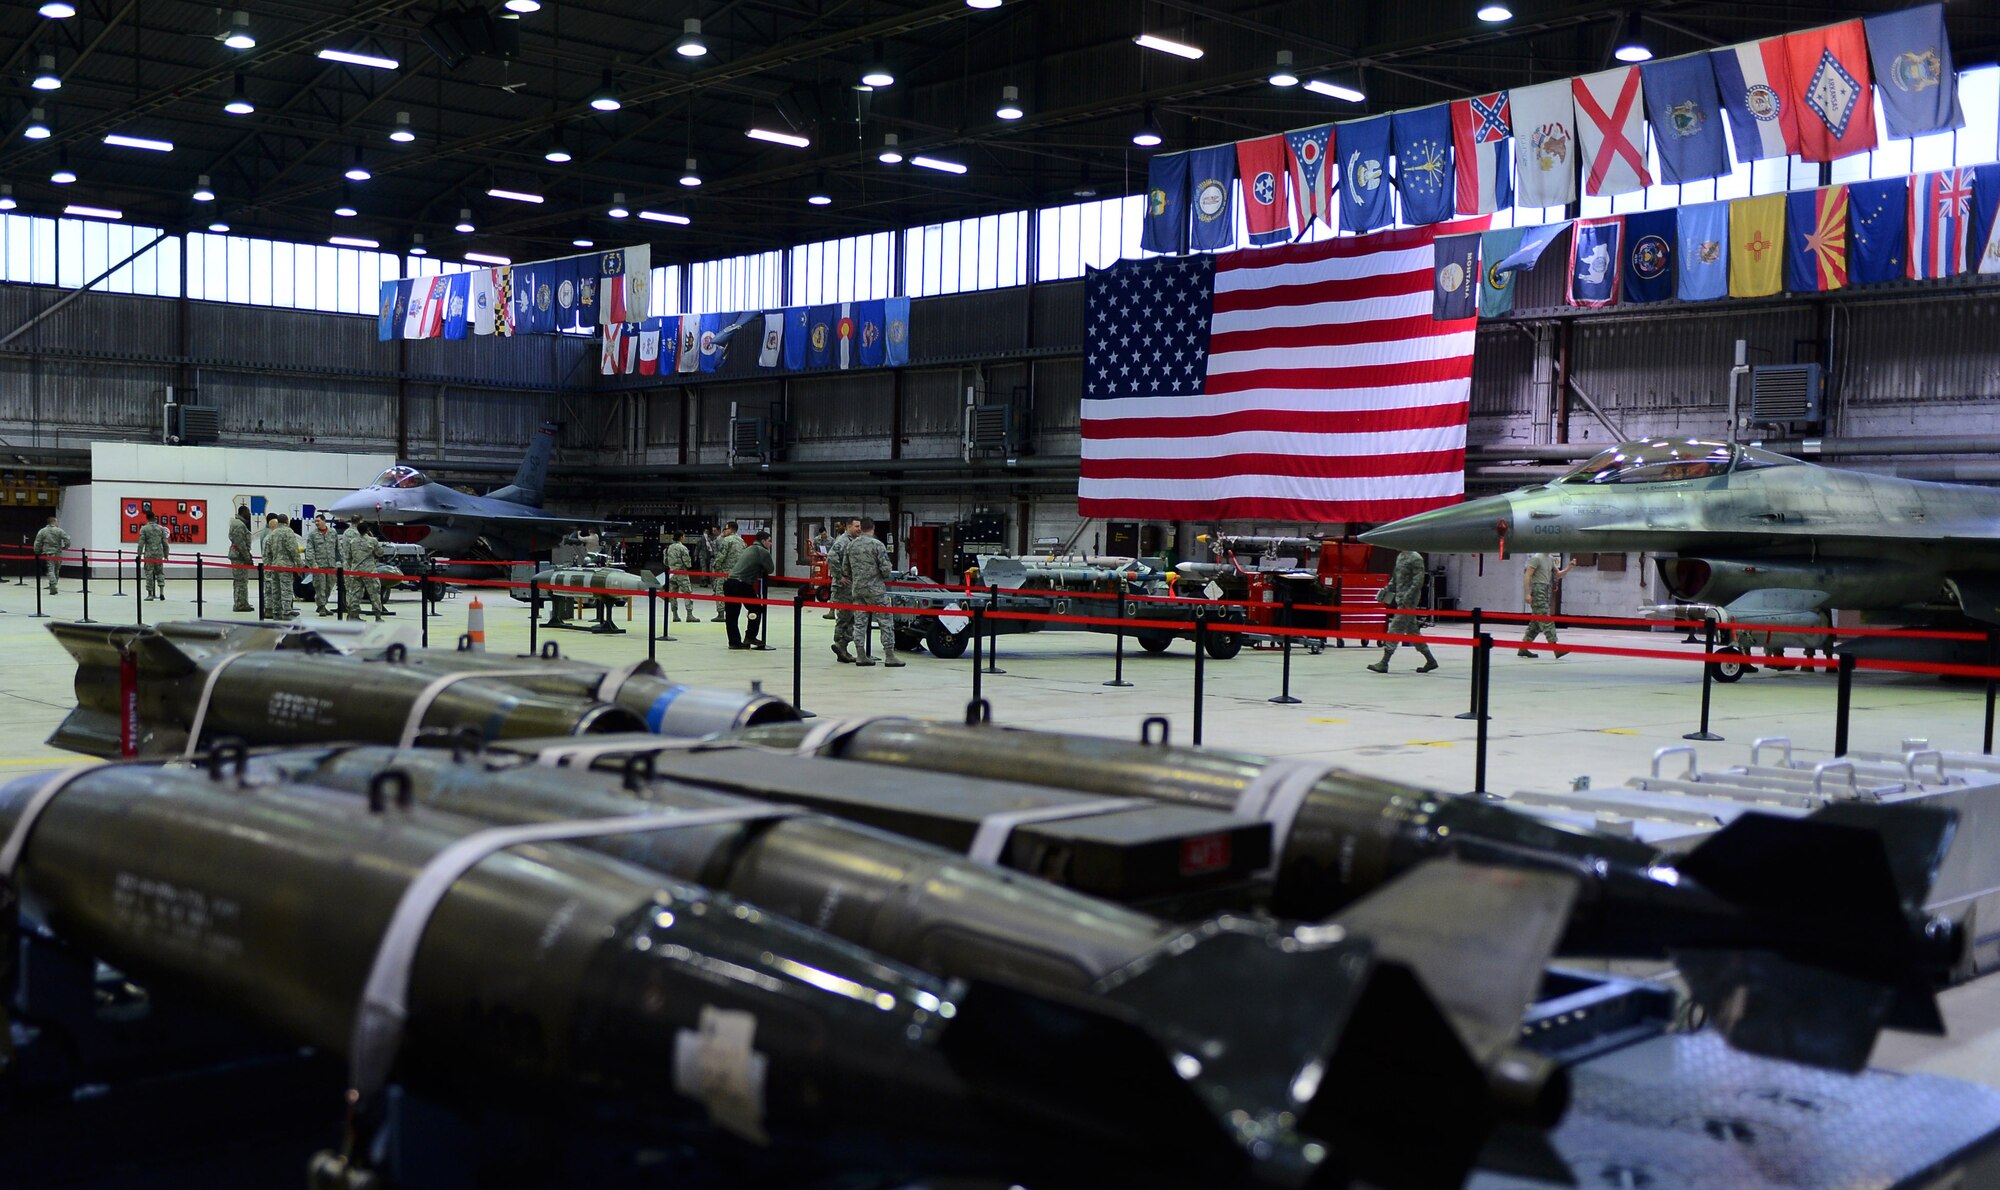 Airmen from the 52nd Aircraft Maintenance Squadron prepare two F-16 Fighting Falcon fighter aircraft before the start of a weapons load competition in Hangar 1 at Spangdahlem Air Base, Germany, Jan. 9, 2015. The four teams in the competition were the weapons load competition quarterly winners of 2014. (U.S. Air Force photo by Airman 1st Class Luke Kitterman/Released)  